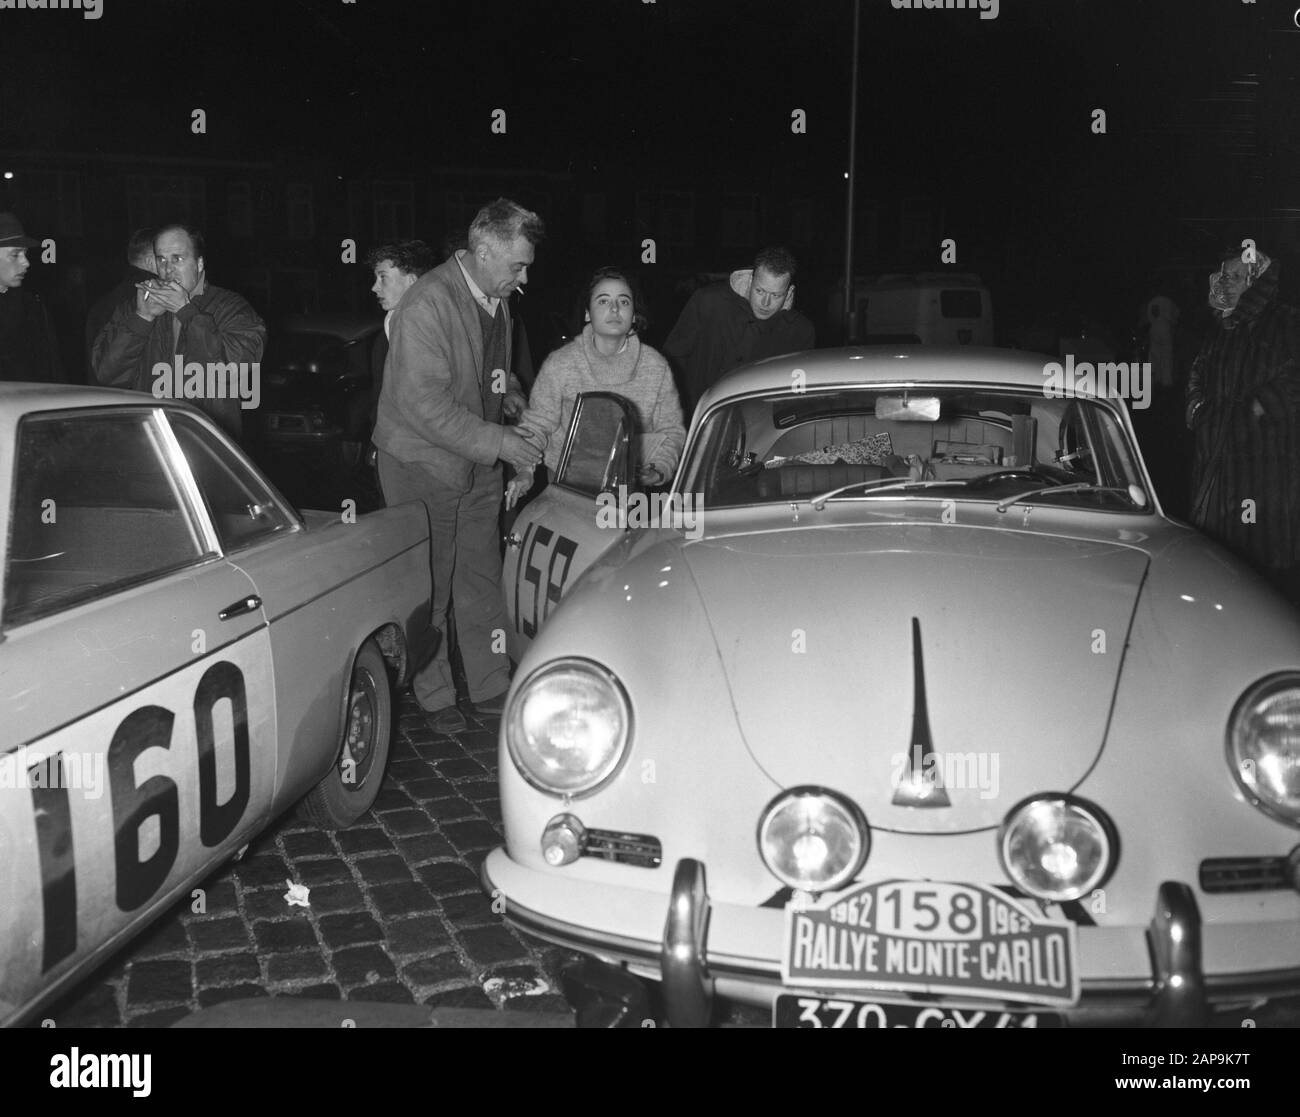 Participants Rally Monte Carlo time control in Scheveningen: Henri Hourtoulle and Jeanne Hourtoulle number 158 Porsche Date: 21 January 1962 Location: Scheveningen, Zuid-Holland Keywords: participants, time checks Personal name: Hourtoulle, Henri, Hourtoulle, Jeanne Institution name: Porsche, Rally Monte Carlo Stock Photo